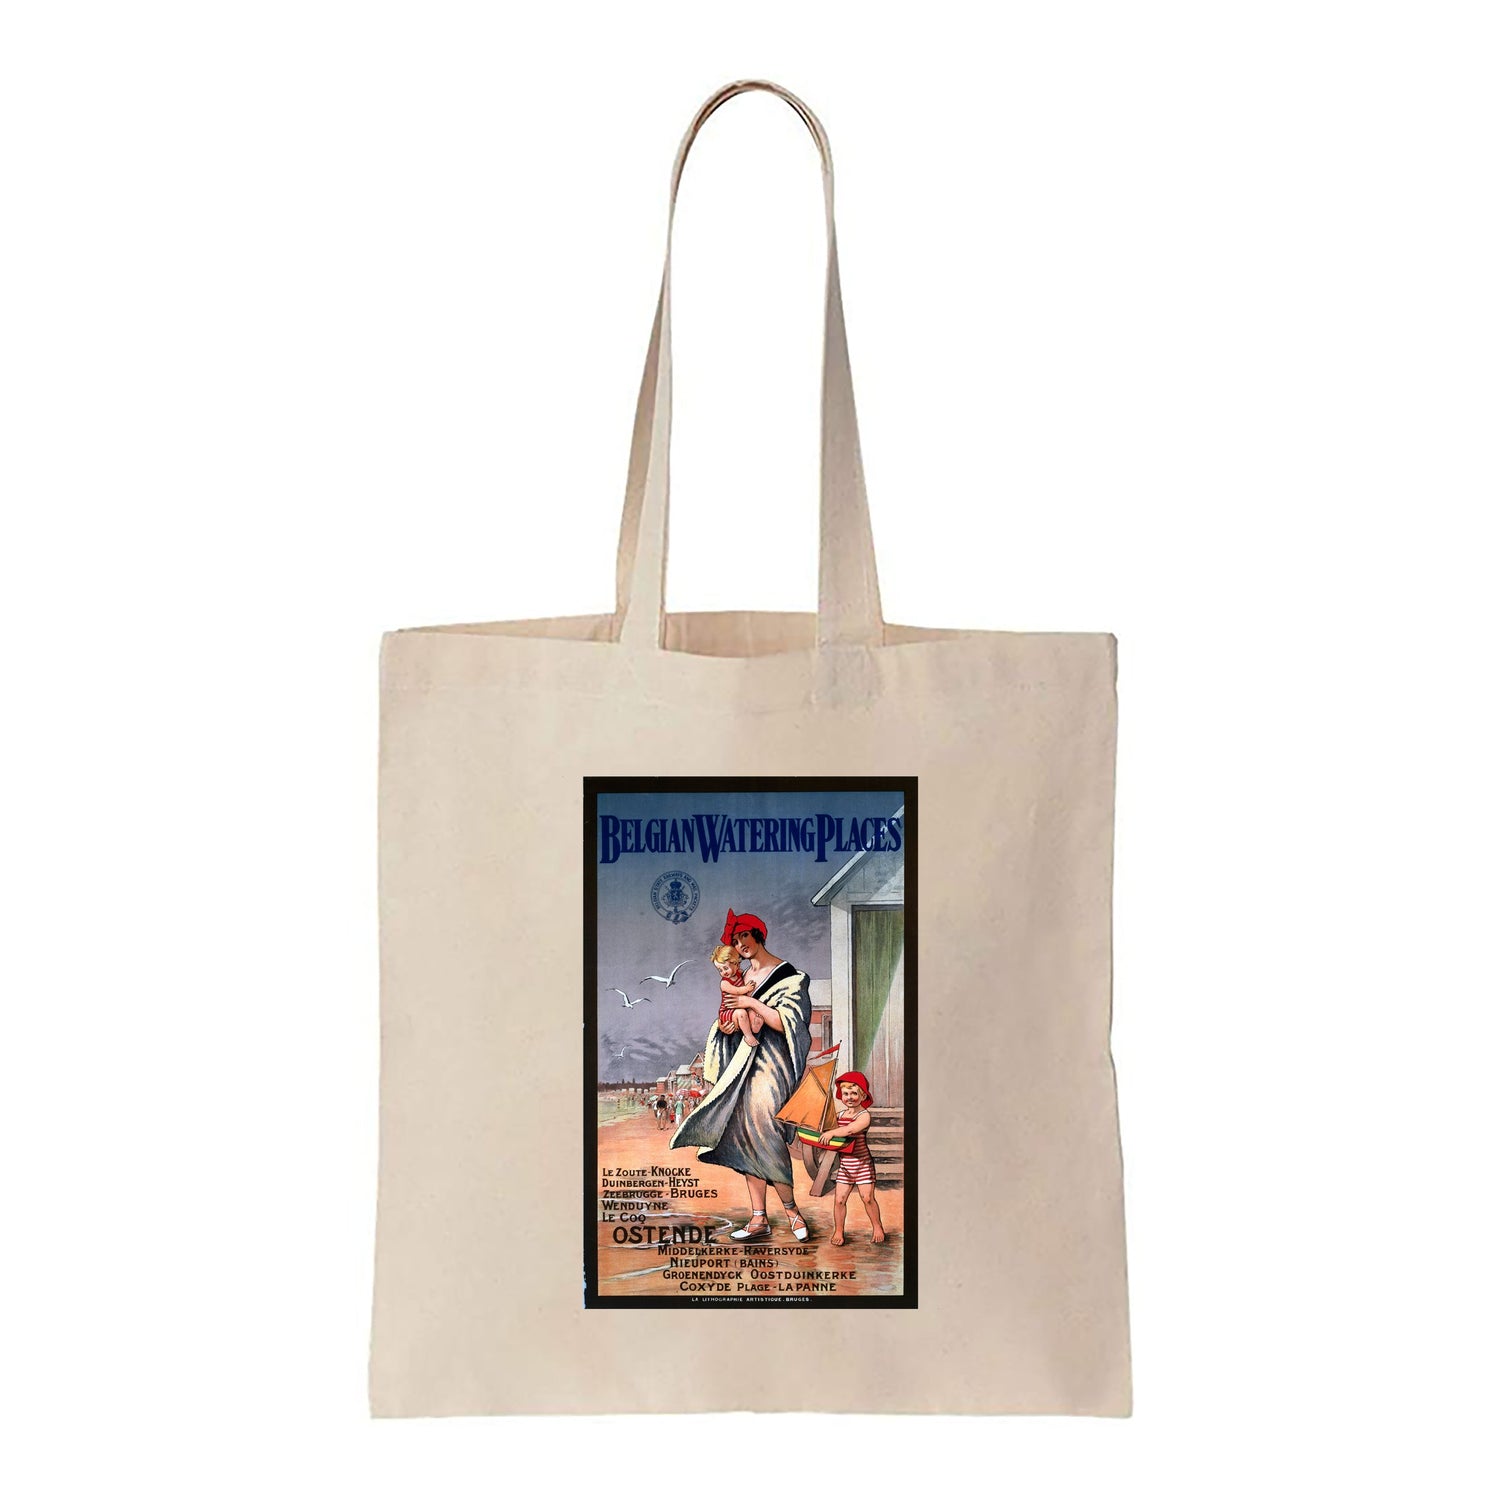 Belgian Watering Places - Ostende - Canvas Tote Bag